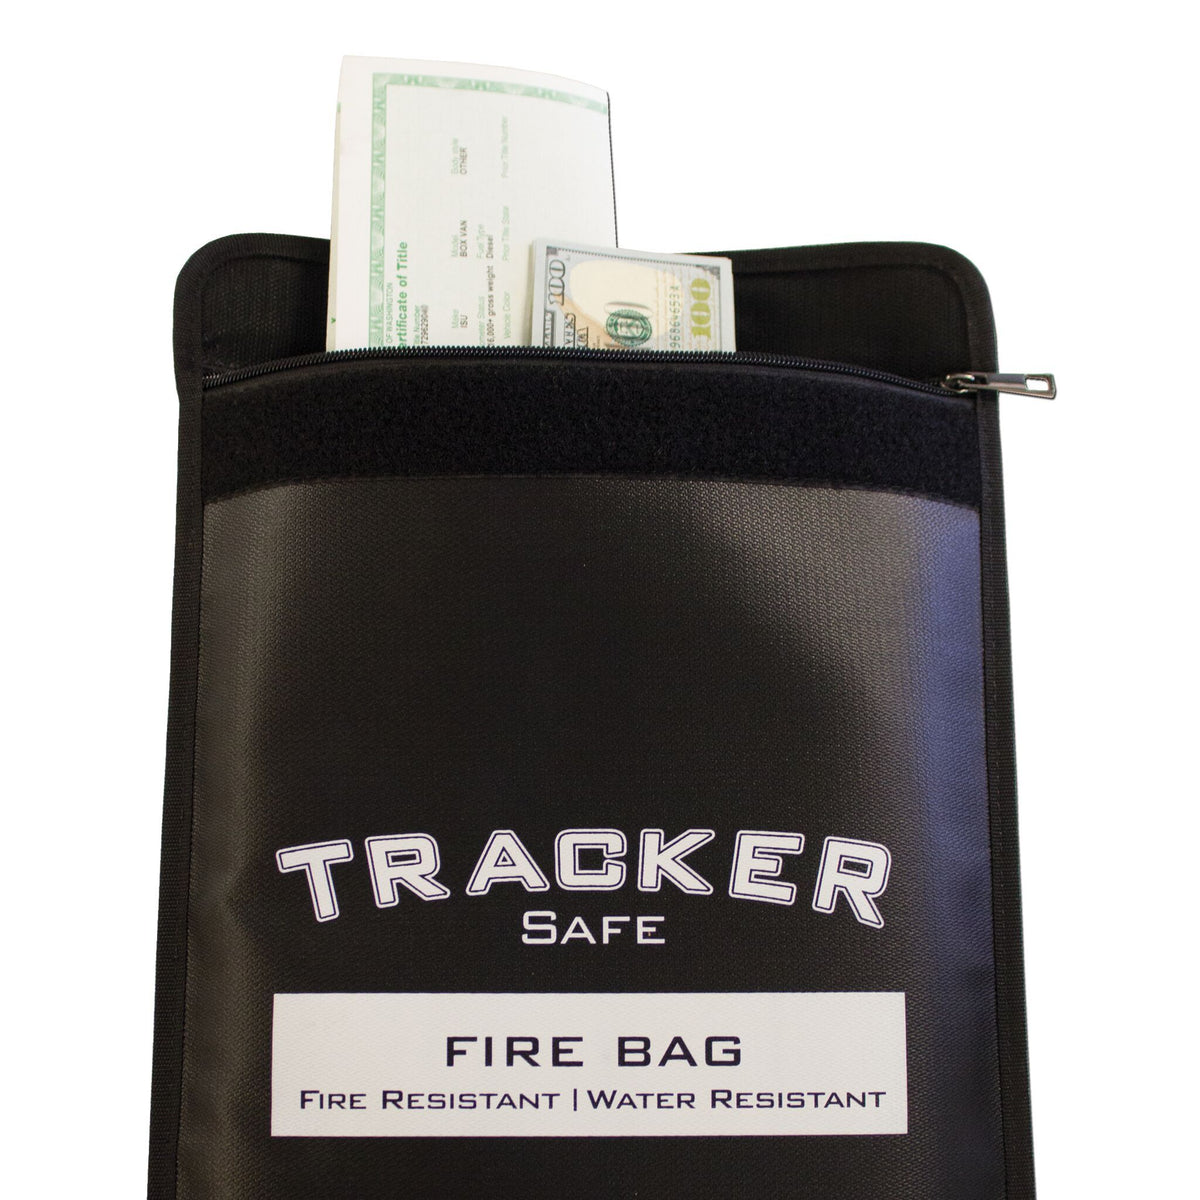  Tracker FB1511 Fire &amp; Water Resistant Bag with Cash &amp; Papers Sticking out